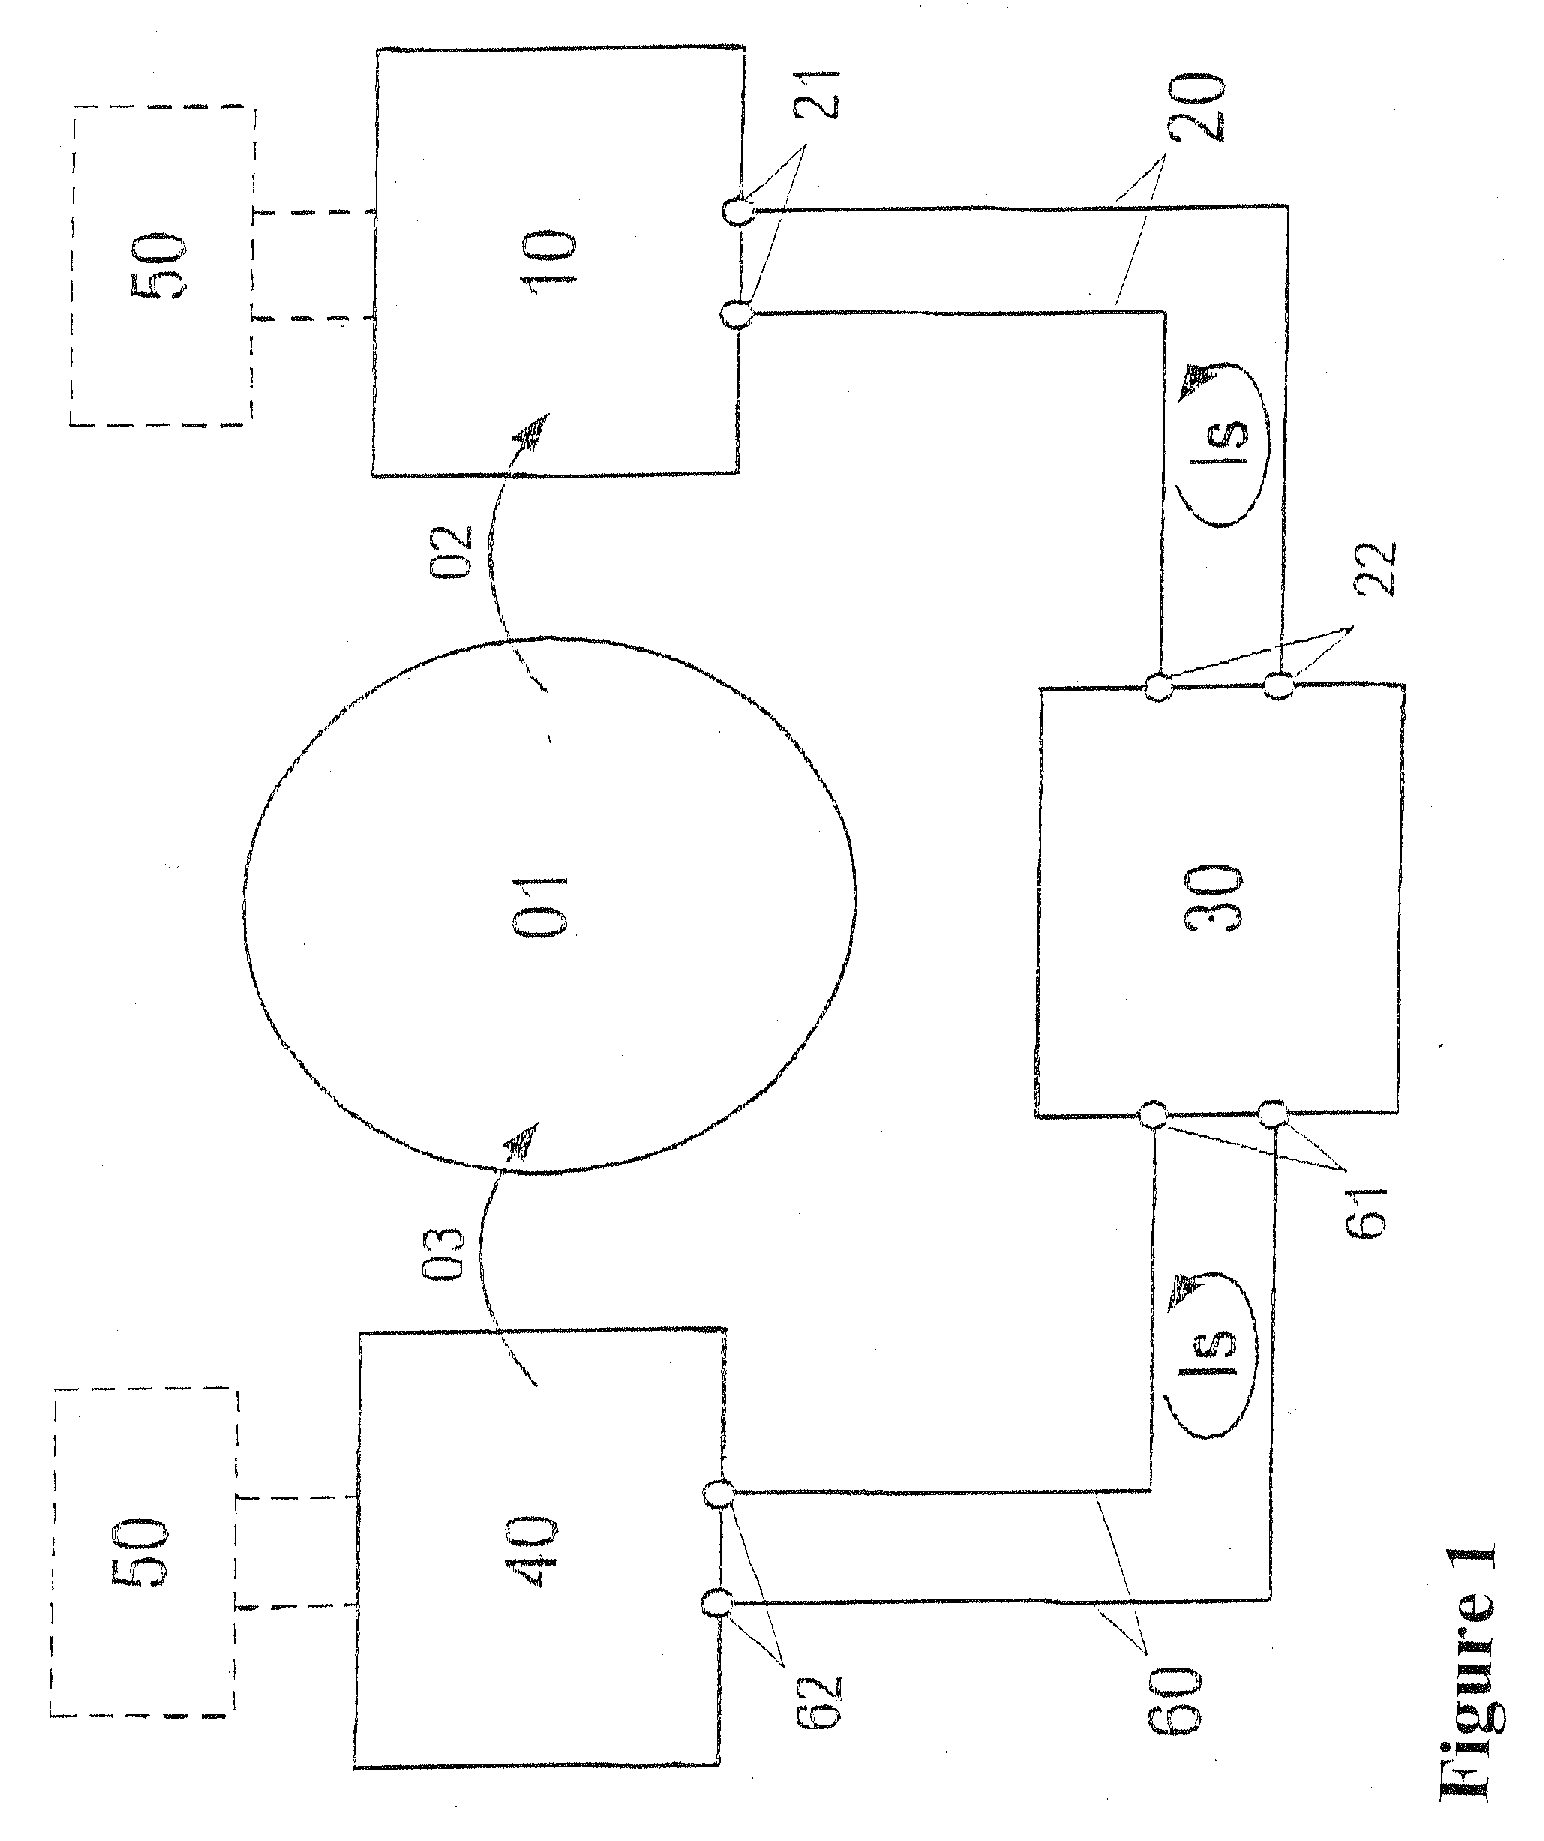 Circuit for safe forwarding of an analog signal value